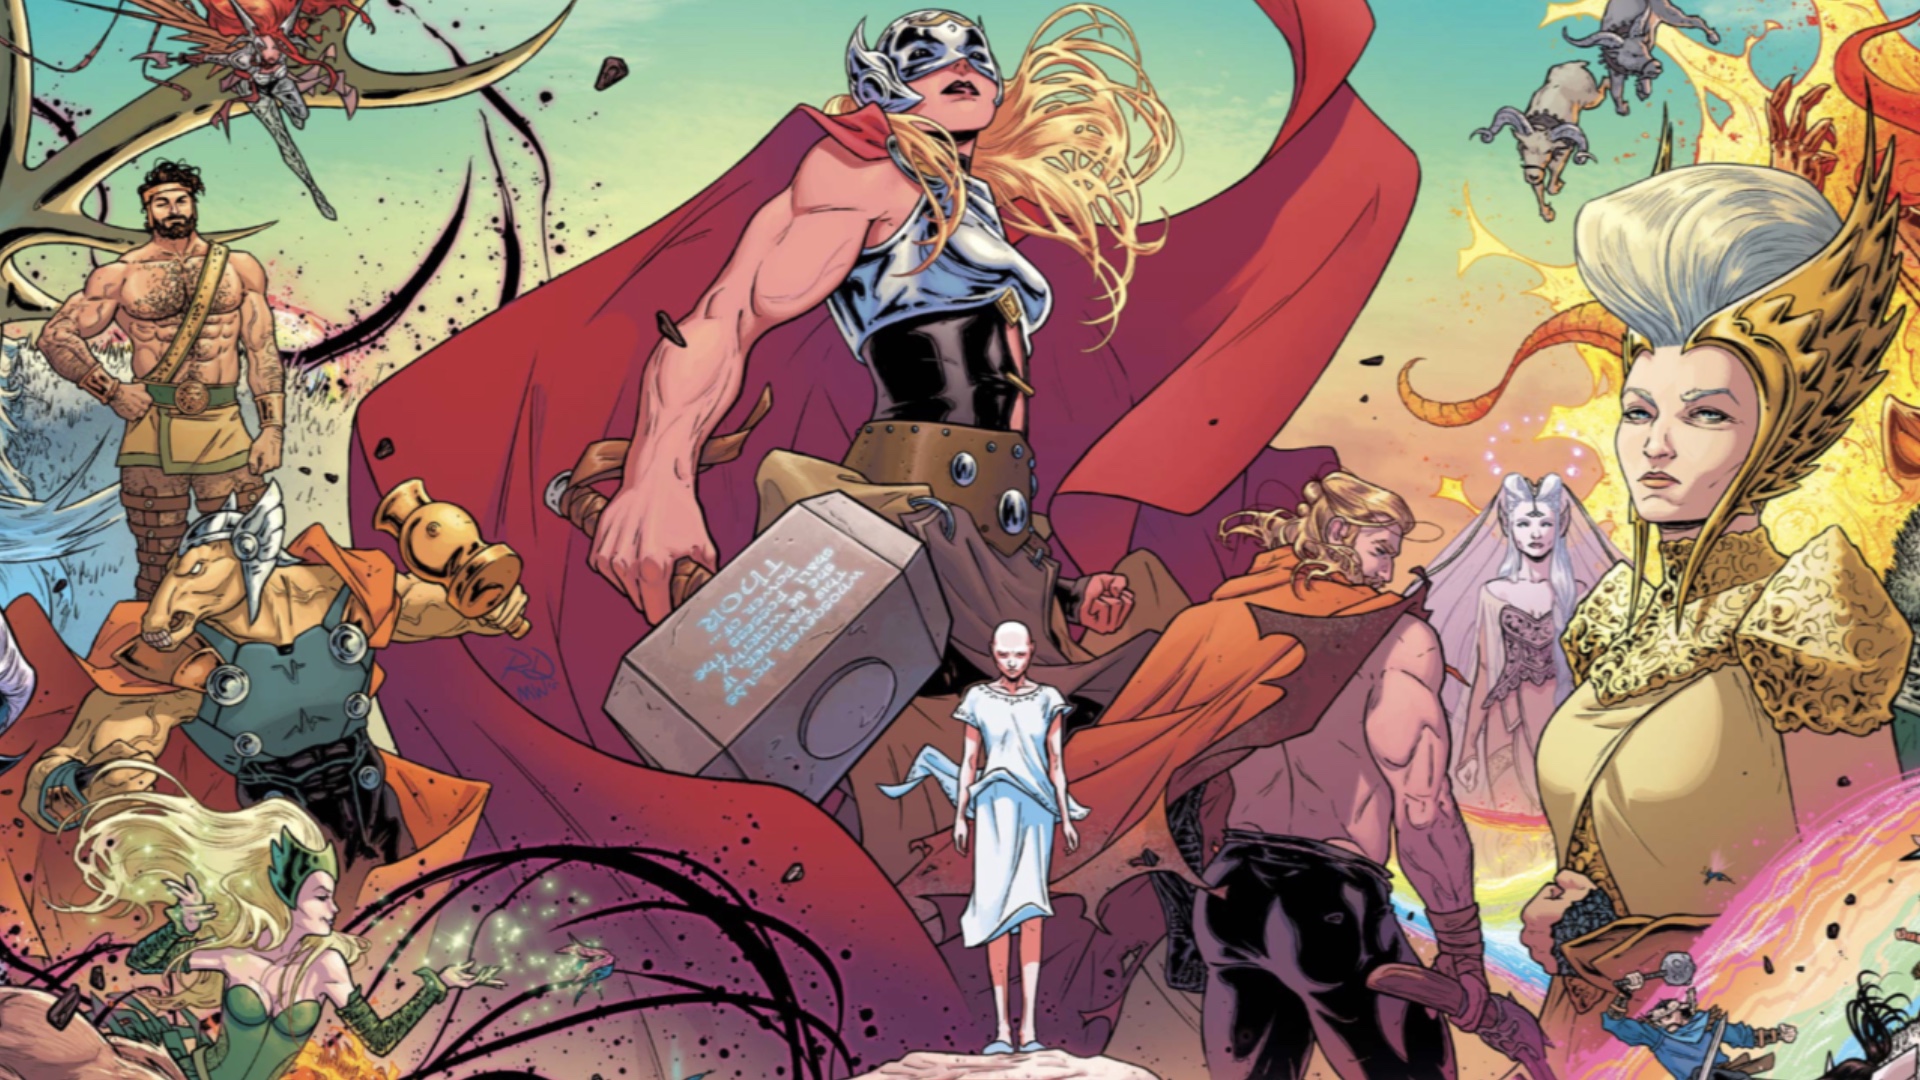 The Mighty Thor #1 cover art